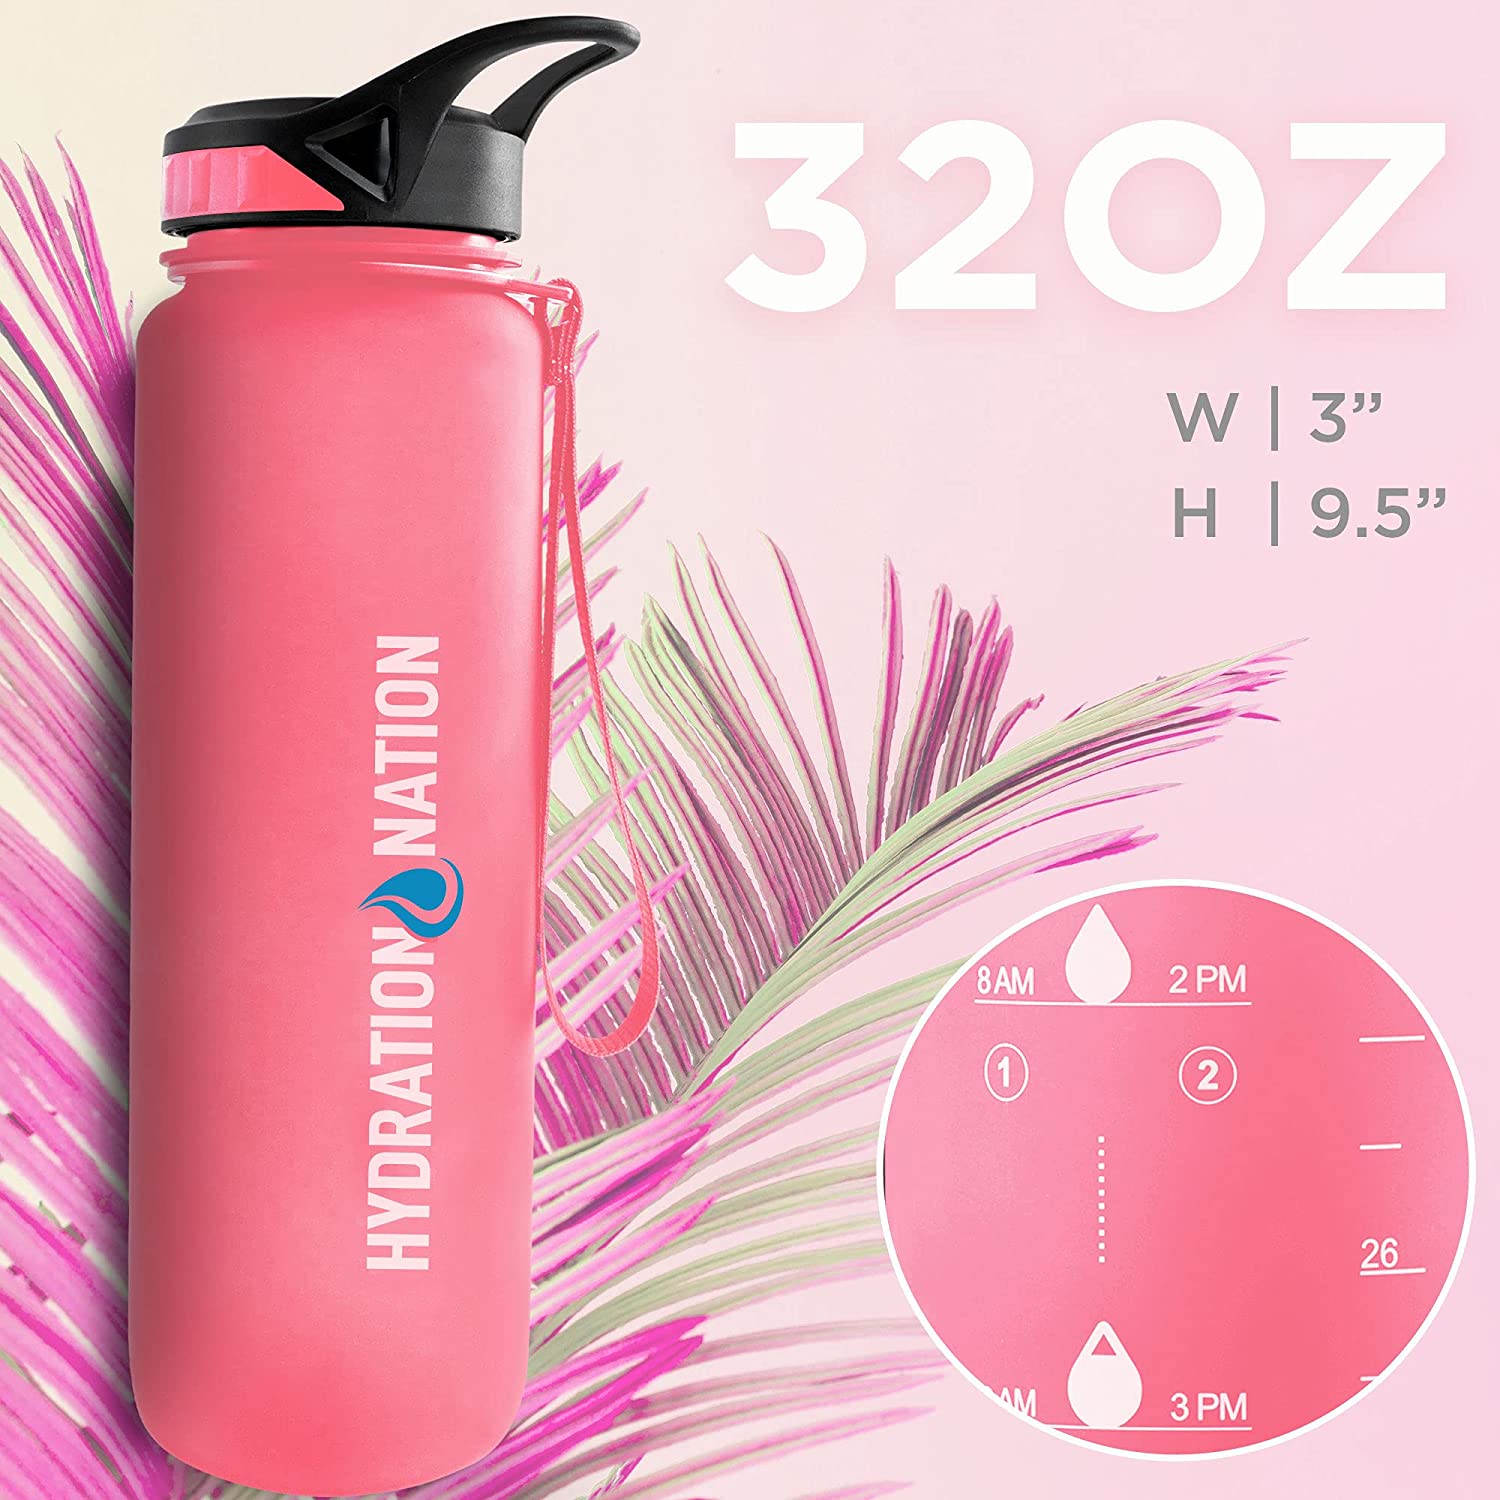 32oz Hydration Bottle, Insulated Water Bottles